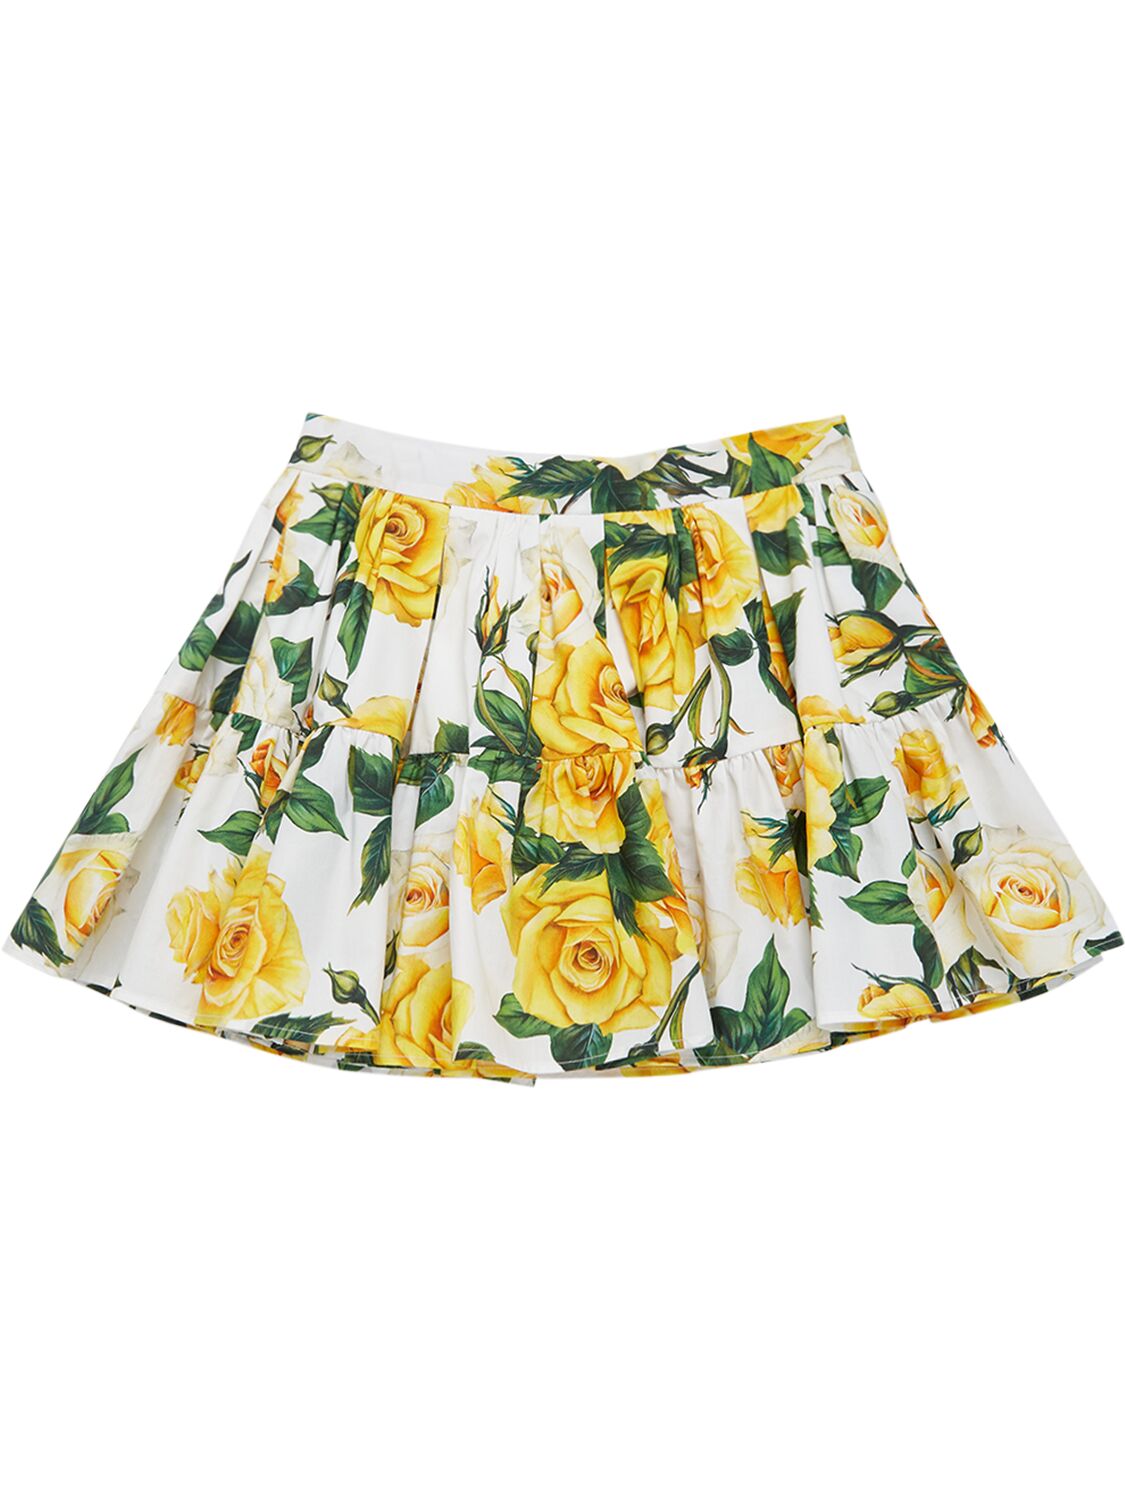 Image of Flower Printed Cotton Skirt